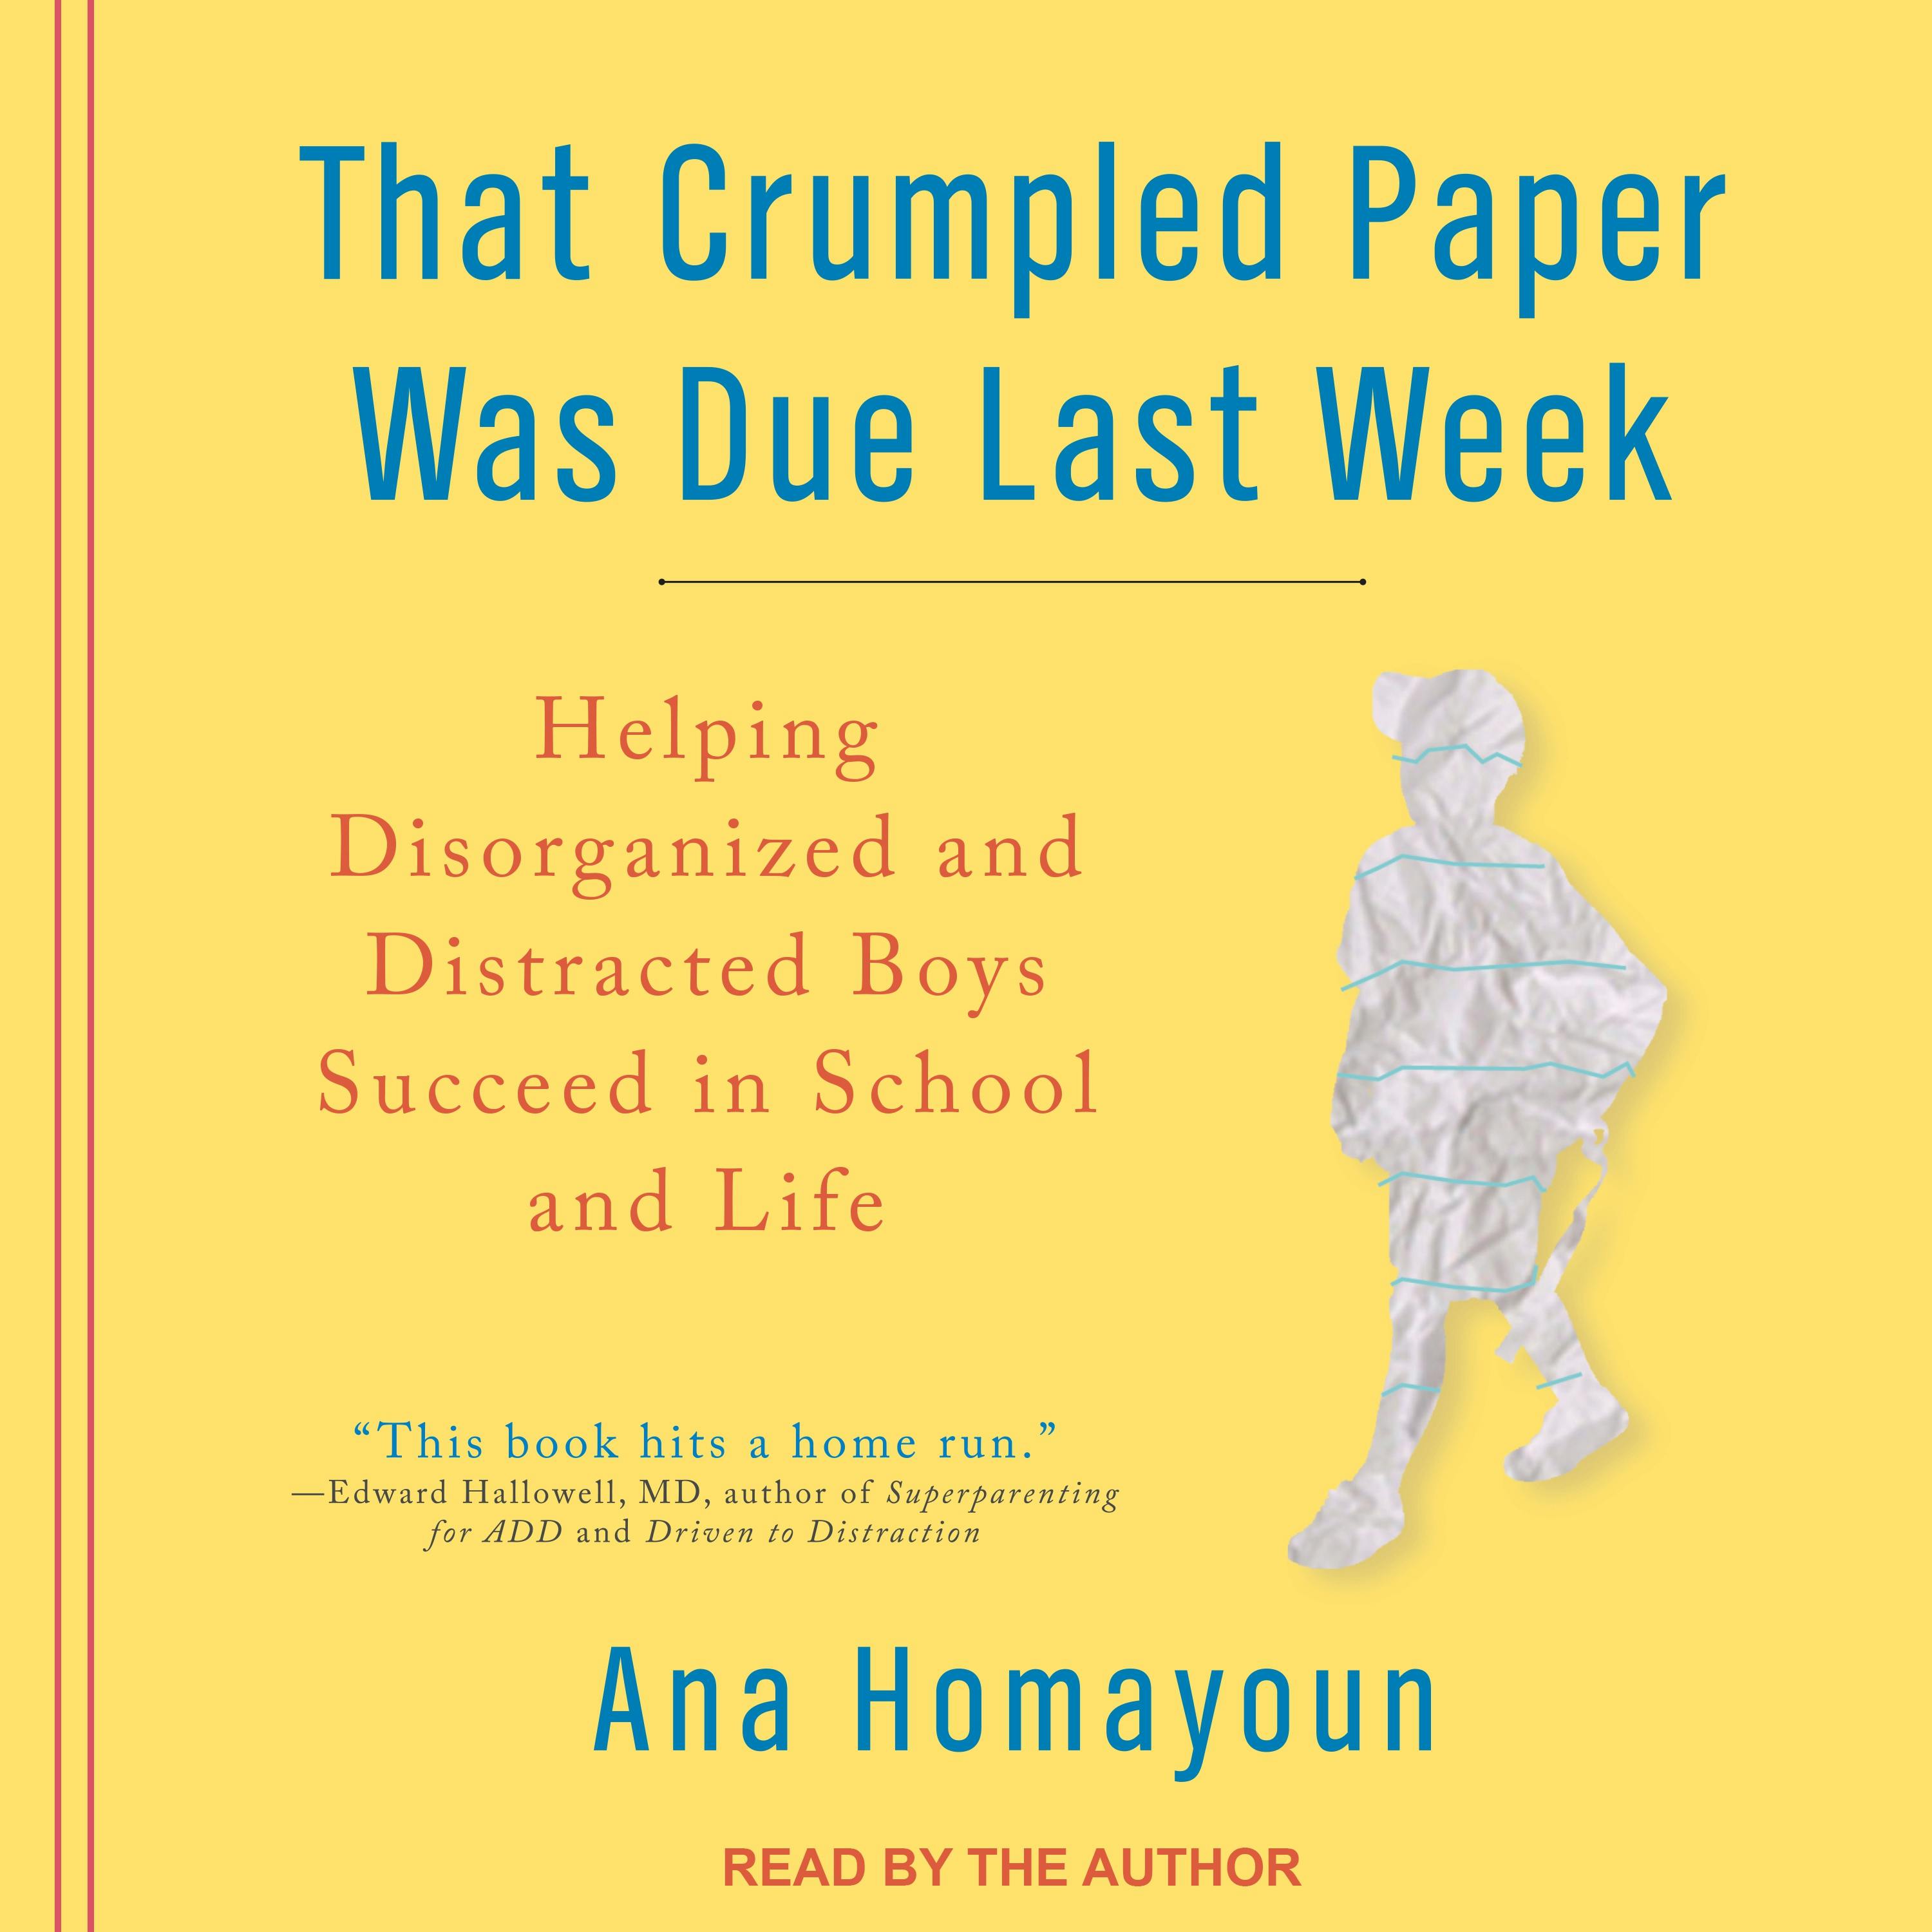 That Crumpled Paper Was Due Last Week: Helping Disorganized and Distracted Boys Succeed in School and Life - Ana Homayoun